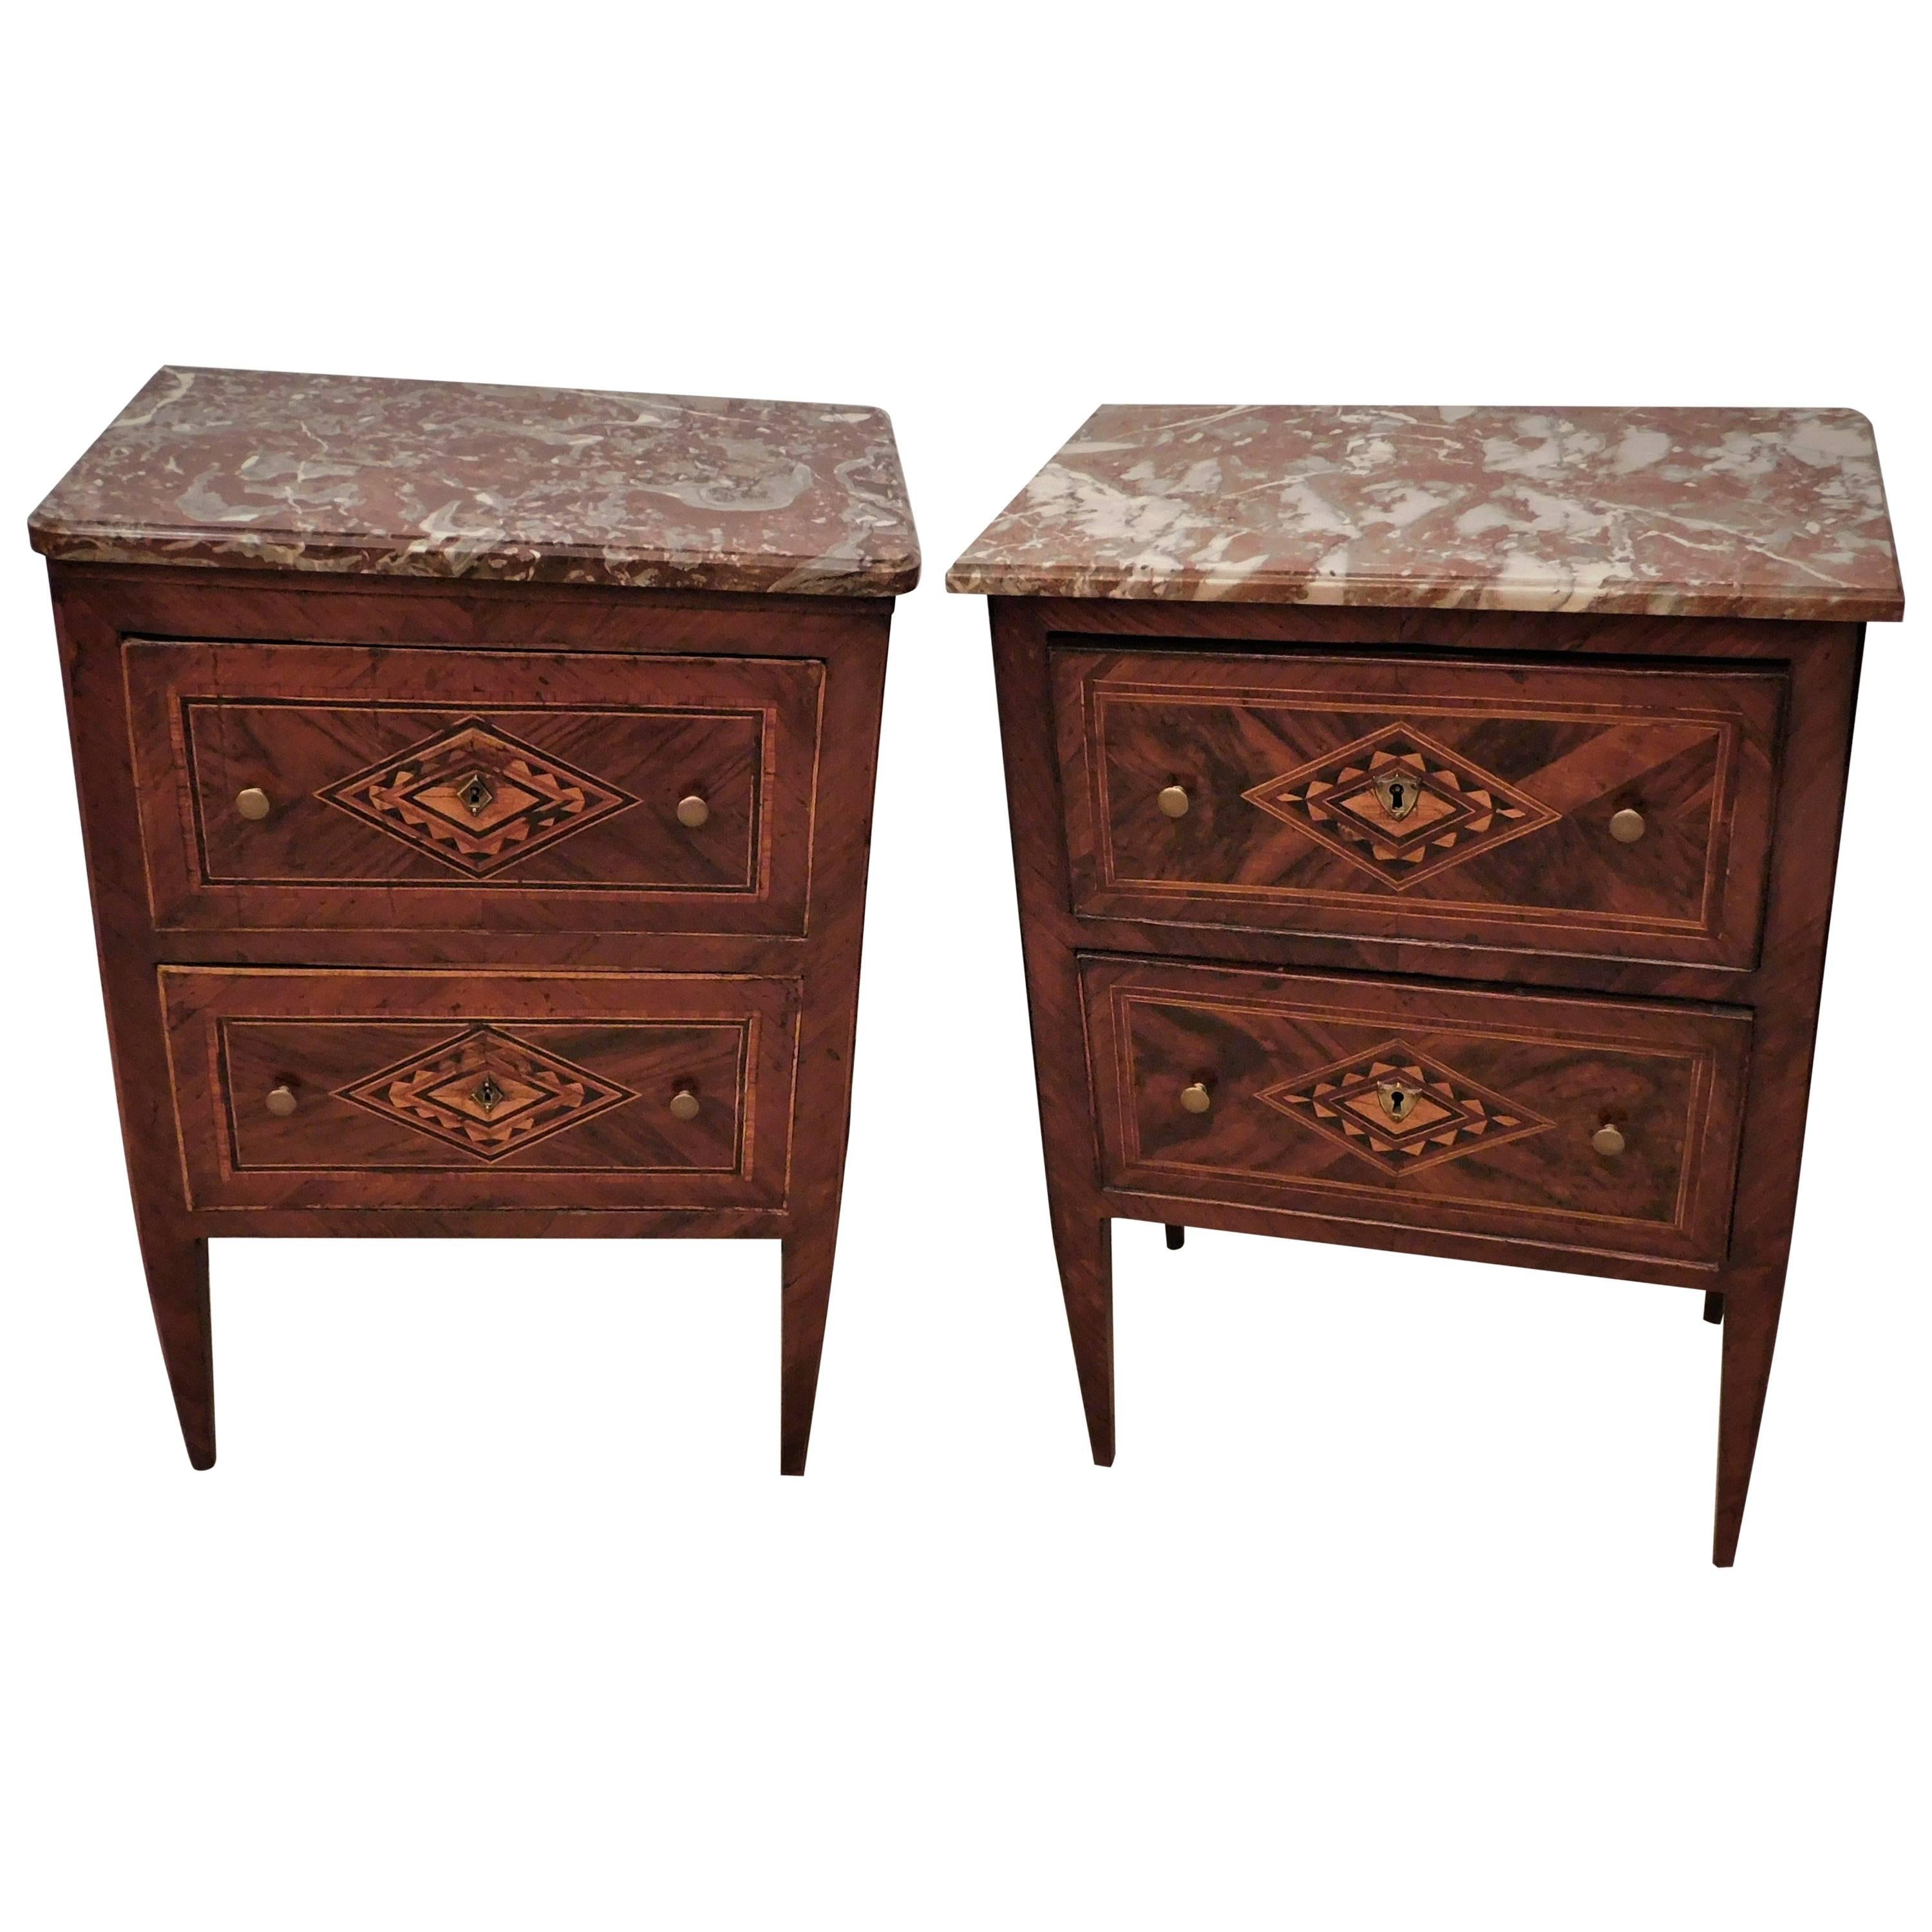 Assembled Pair of Italian Neoclassical Marble-Top Small Commodes, circa 1810 For Sale